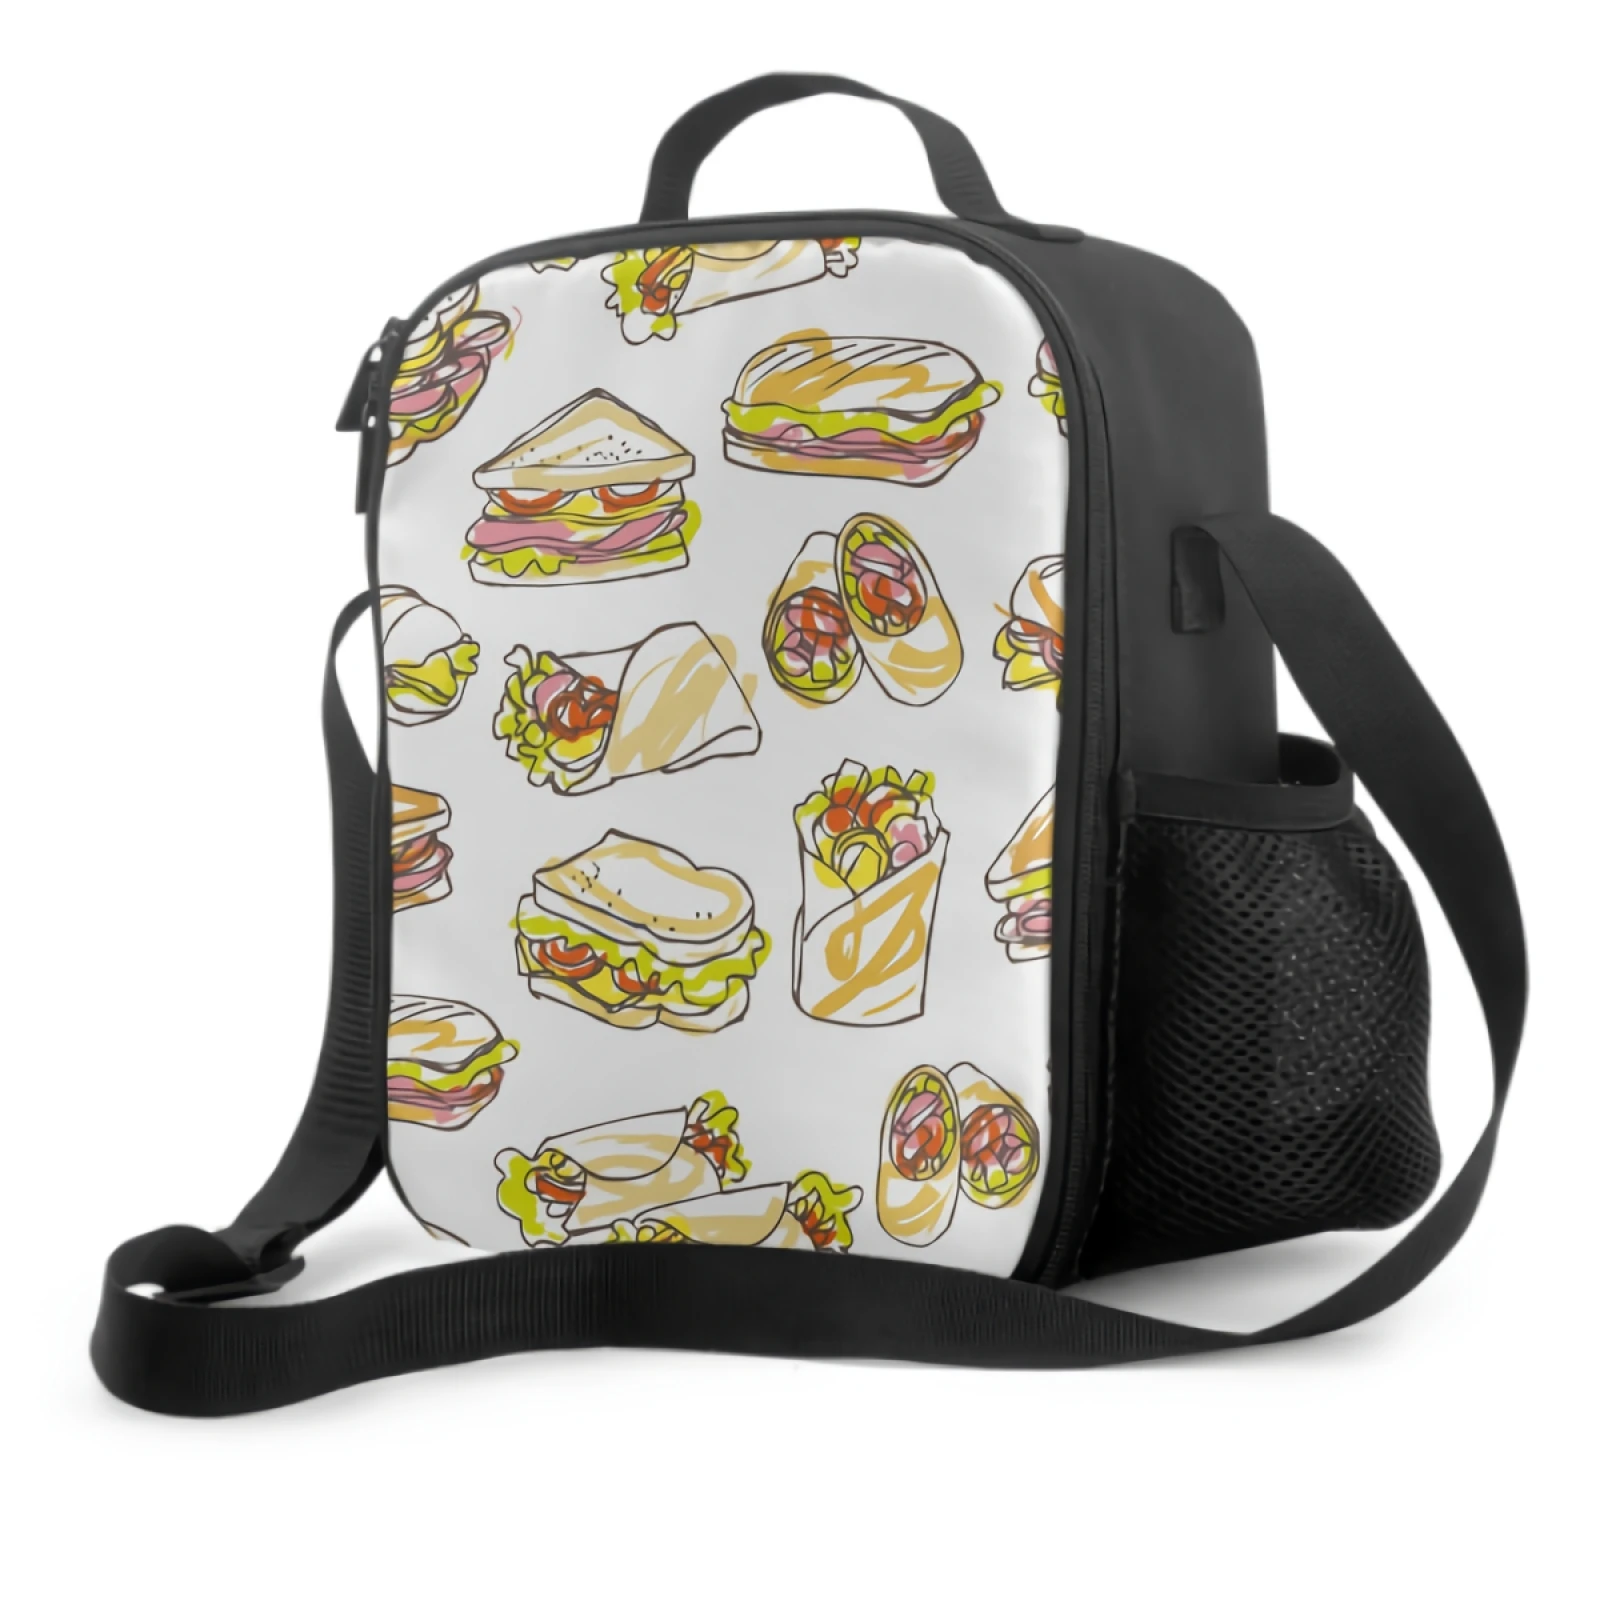 

Sandwich Wrap Insulated Lunch Box for Girls Boys Leakproof Portable Lunch Bag Durable Cooler Tote Bag for Beach Picnic Office